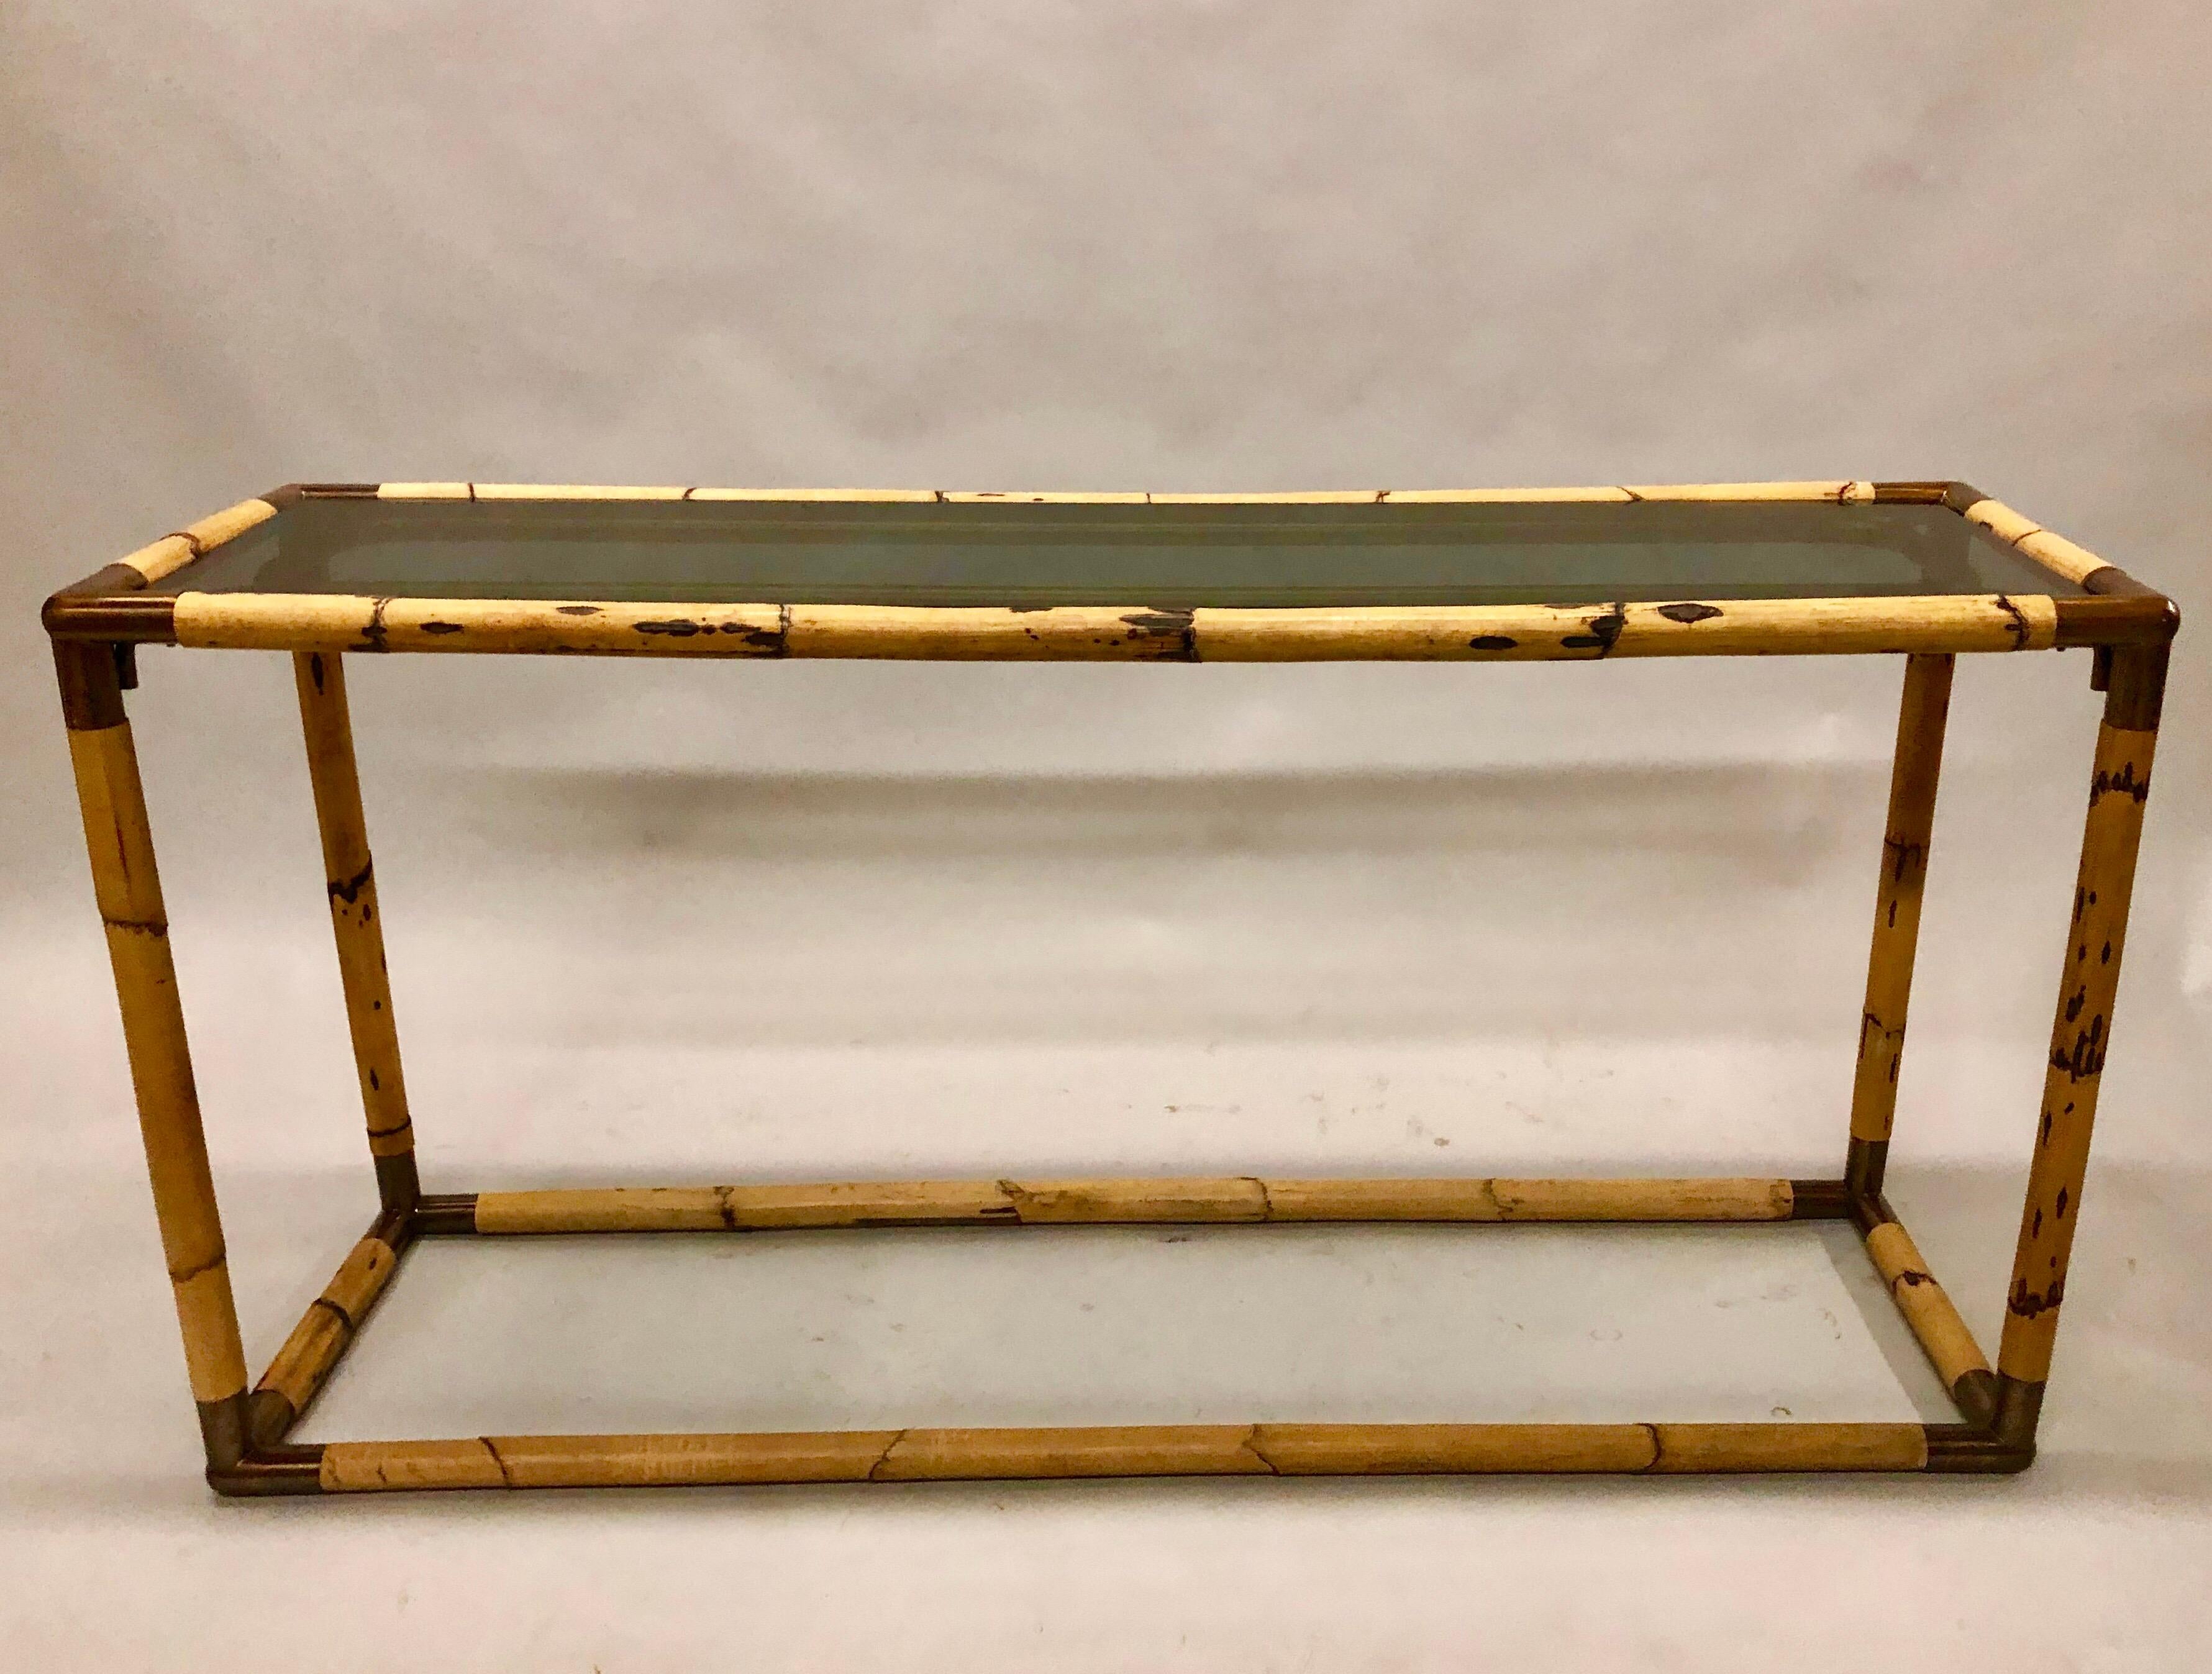 An elegant Italian Mid-Century Modern bamboo / rattan and smoked glass console or sofa table by Giovanni Banci circa 1970. Original smoked glass top accompanies the piece.

Giovanni Banci was a Florentine sculptor and furniture designer. His